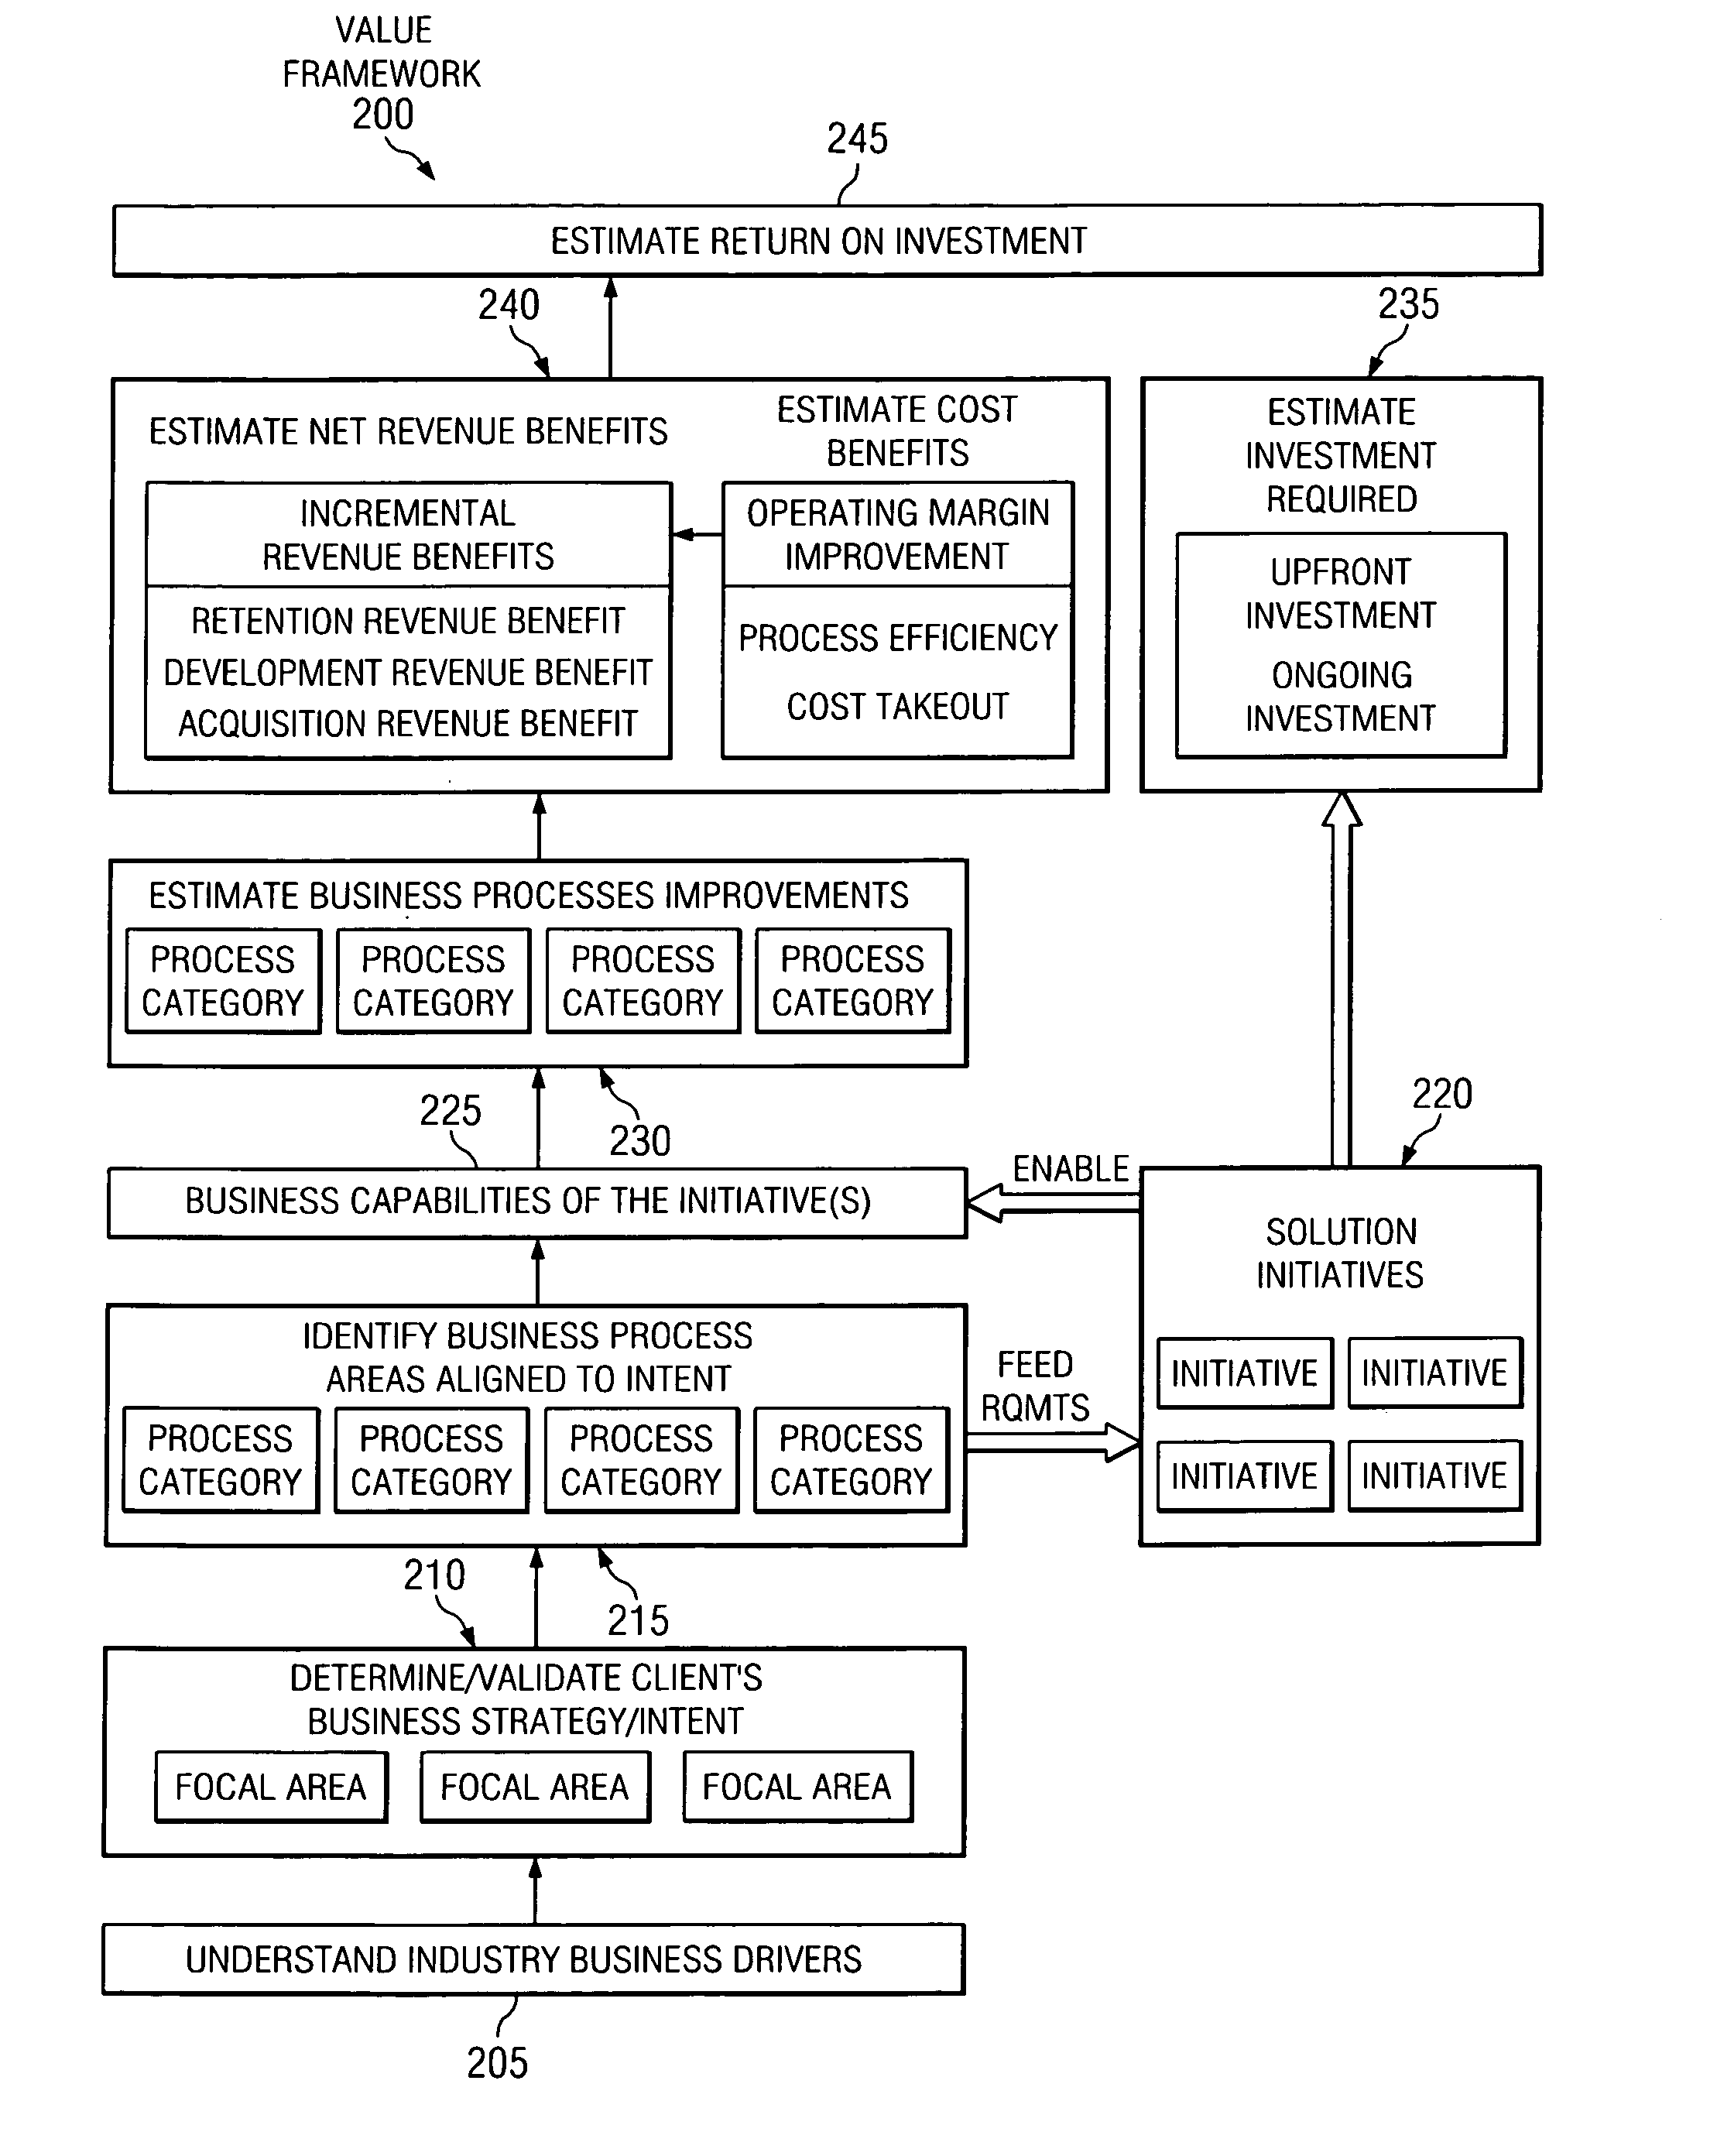 Method and apparatus for a value framework and return on investment model